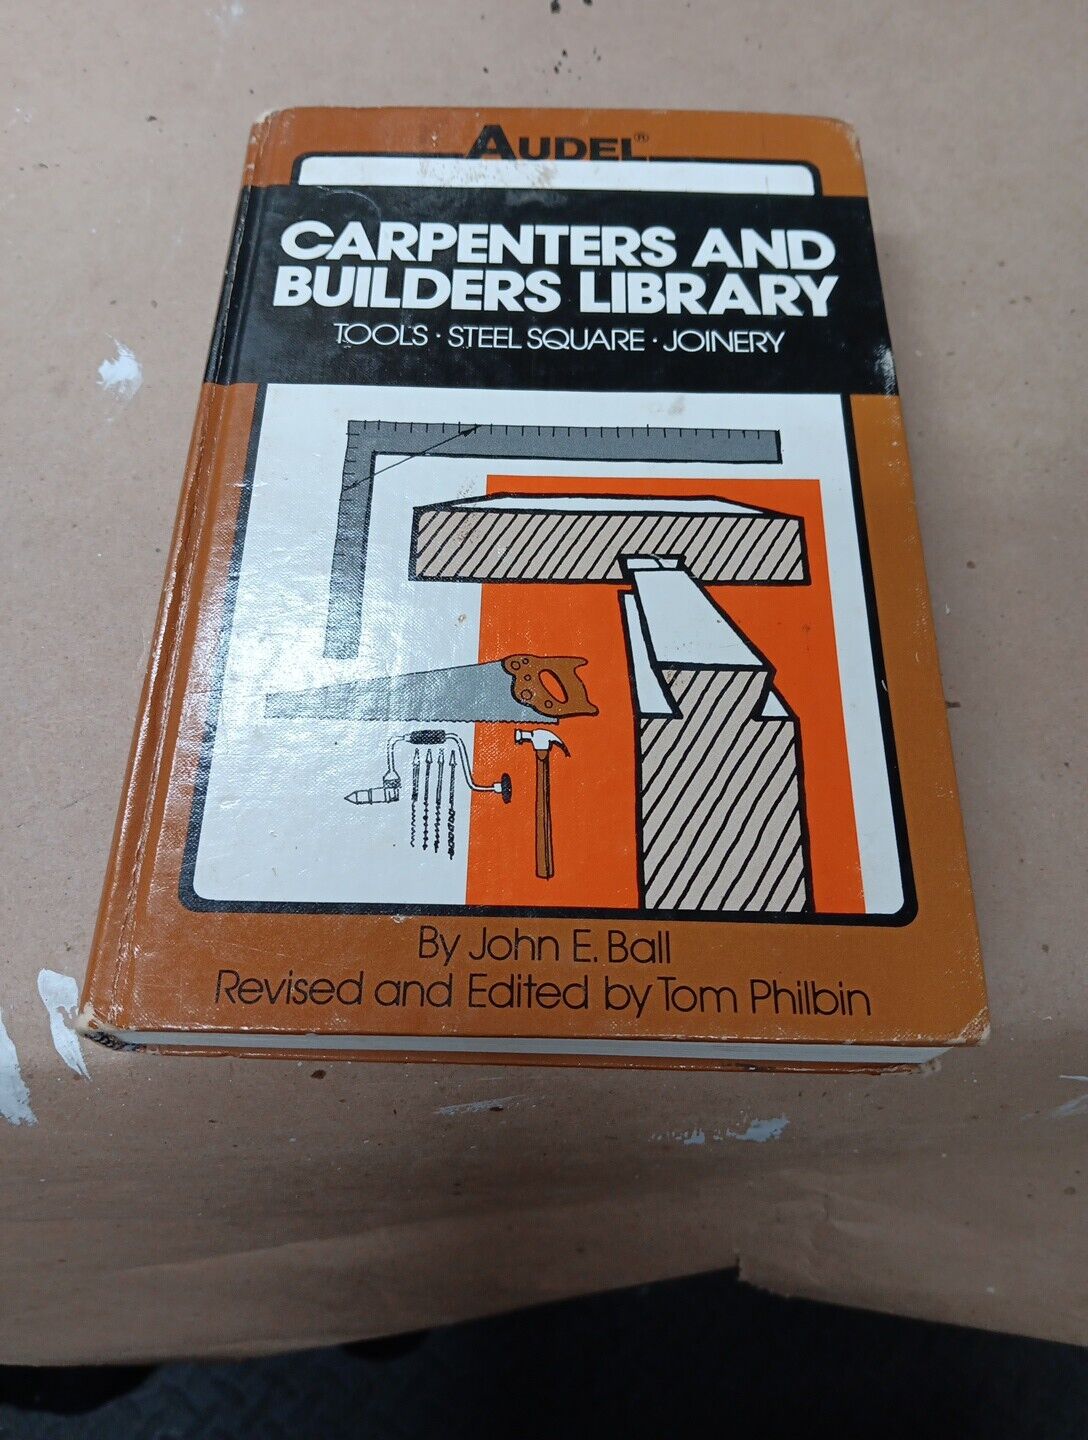 AUDELS Carpenters and Builders Library No. 1 1982 John E Ball Hardcover